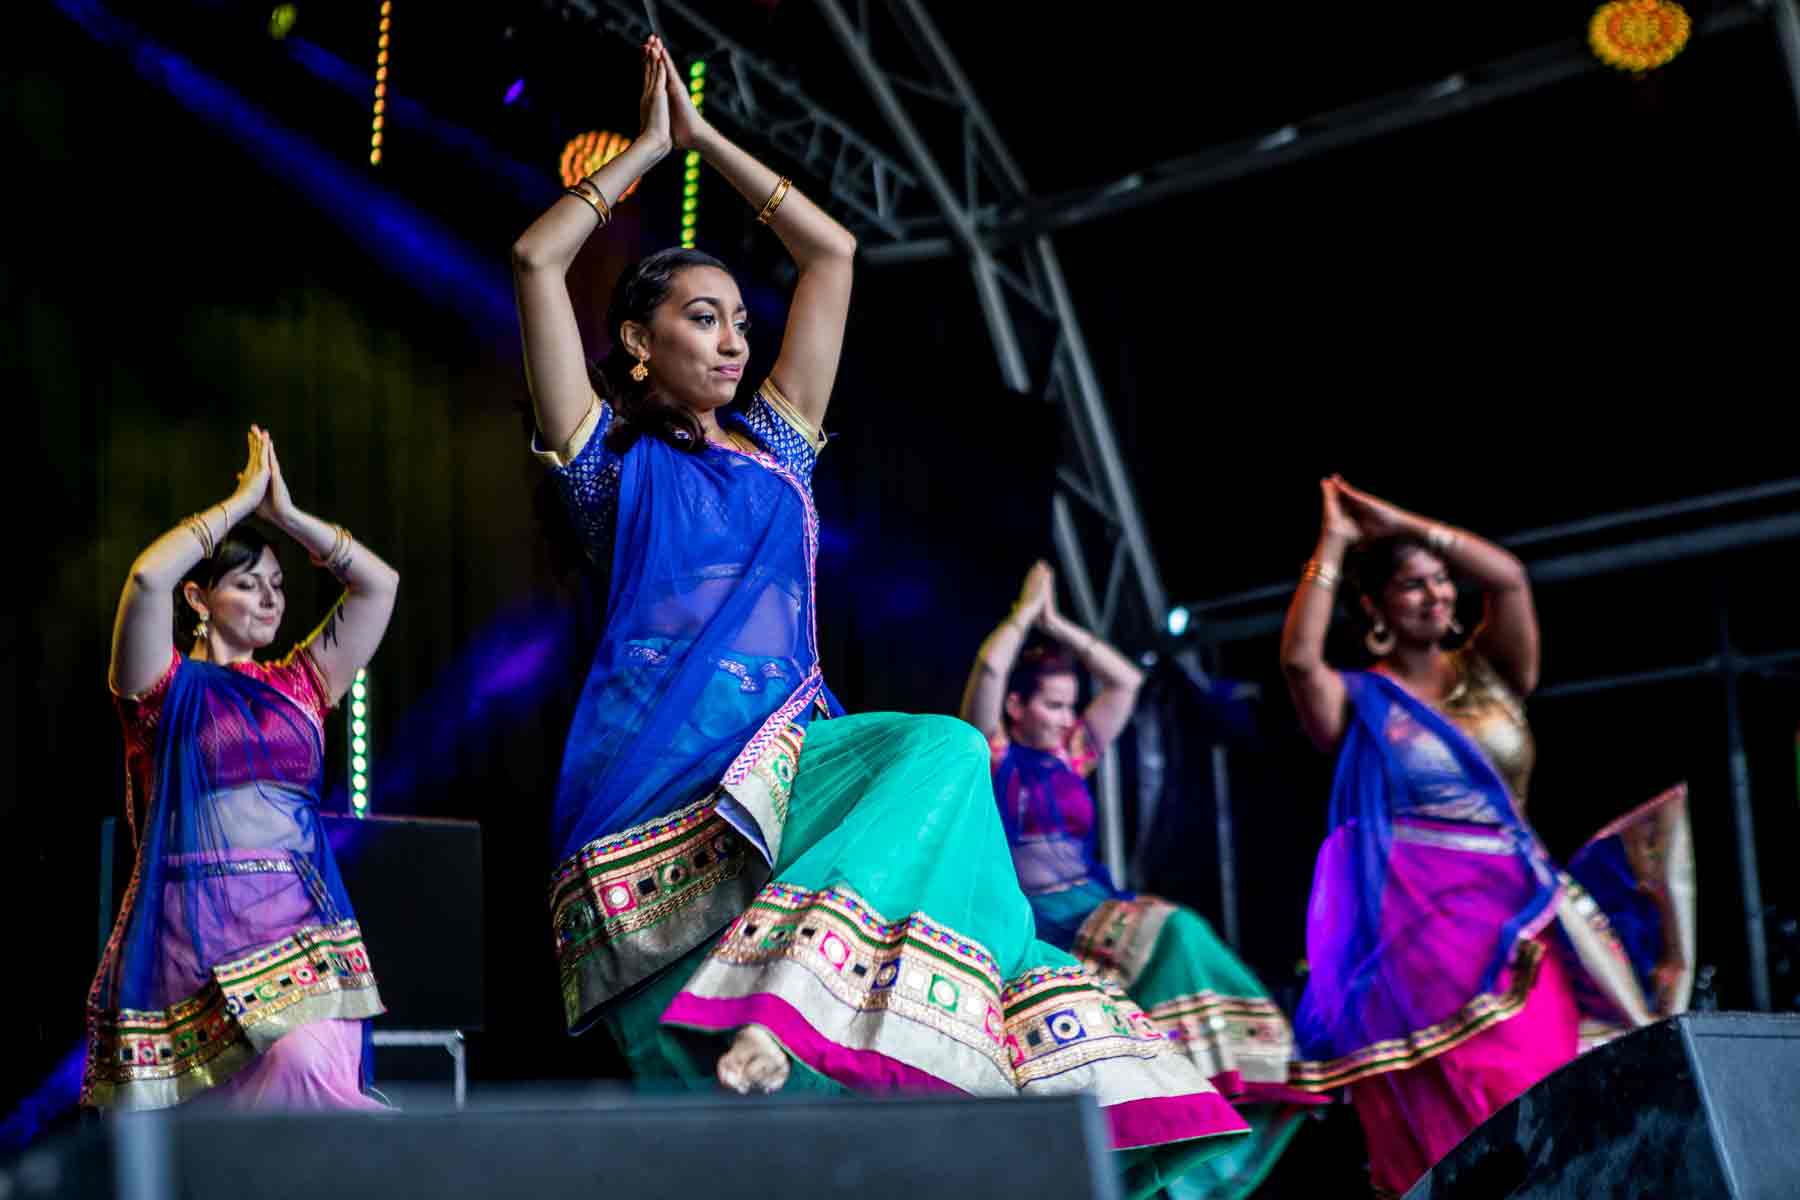 A group of dancers wearing traditional indian attire pose with their hands above their heads